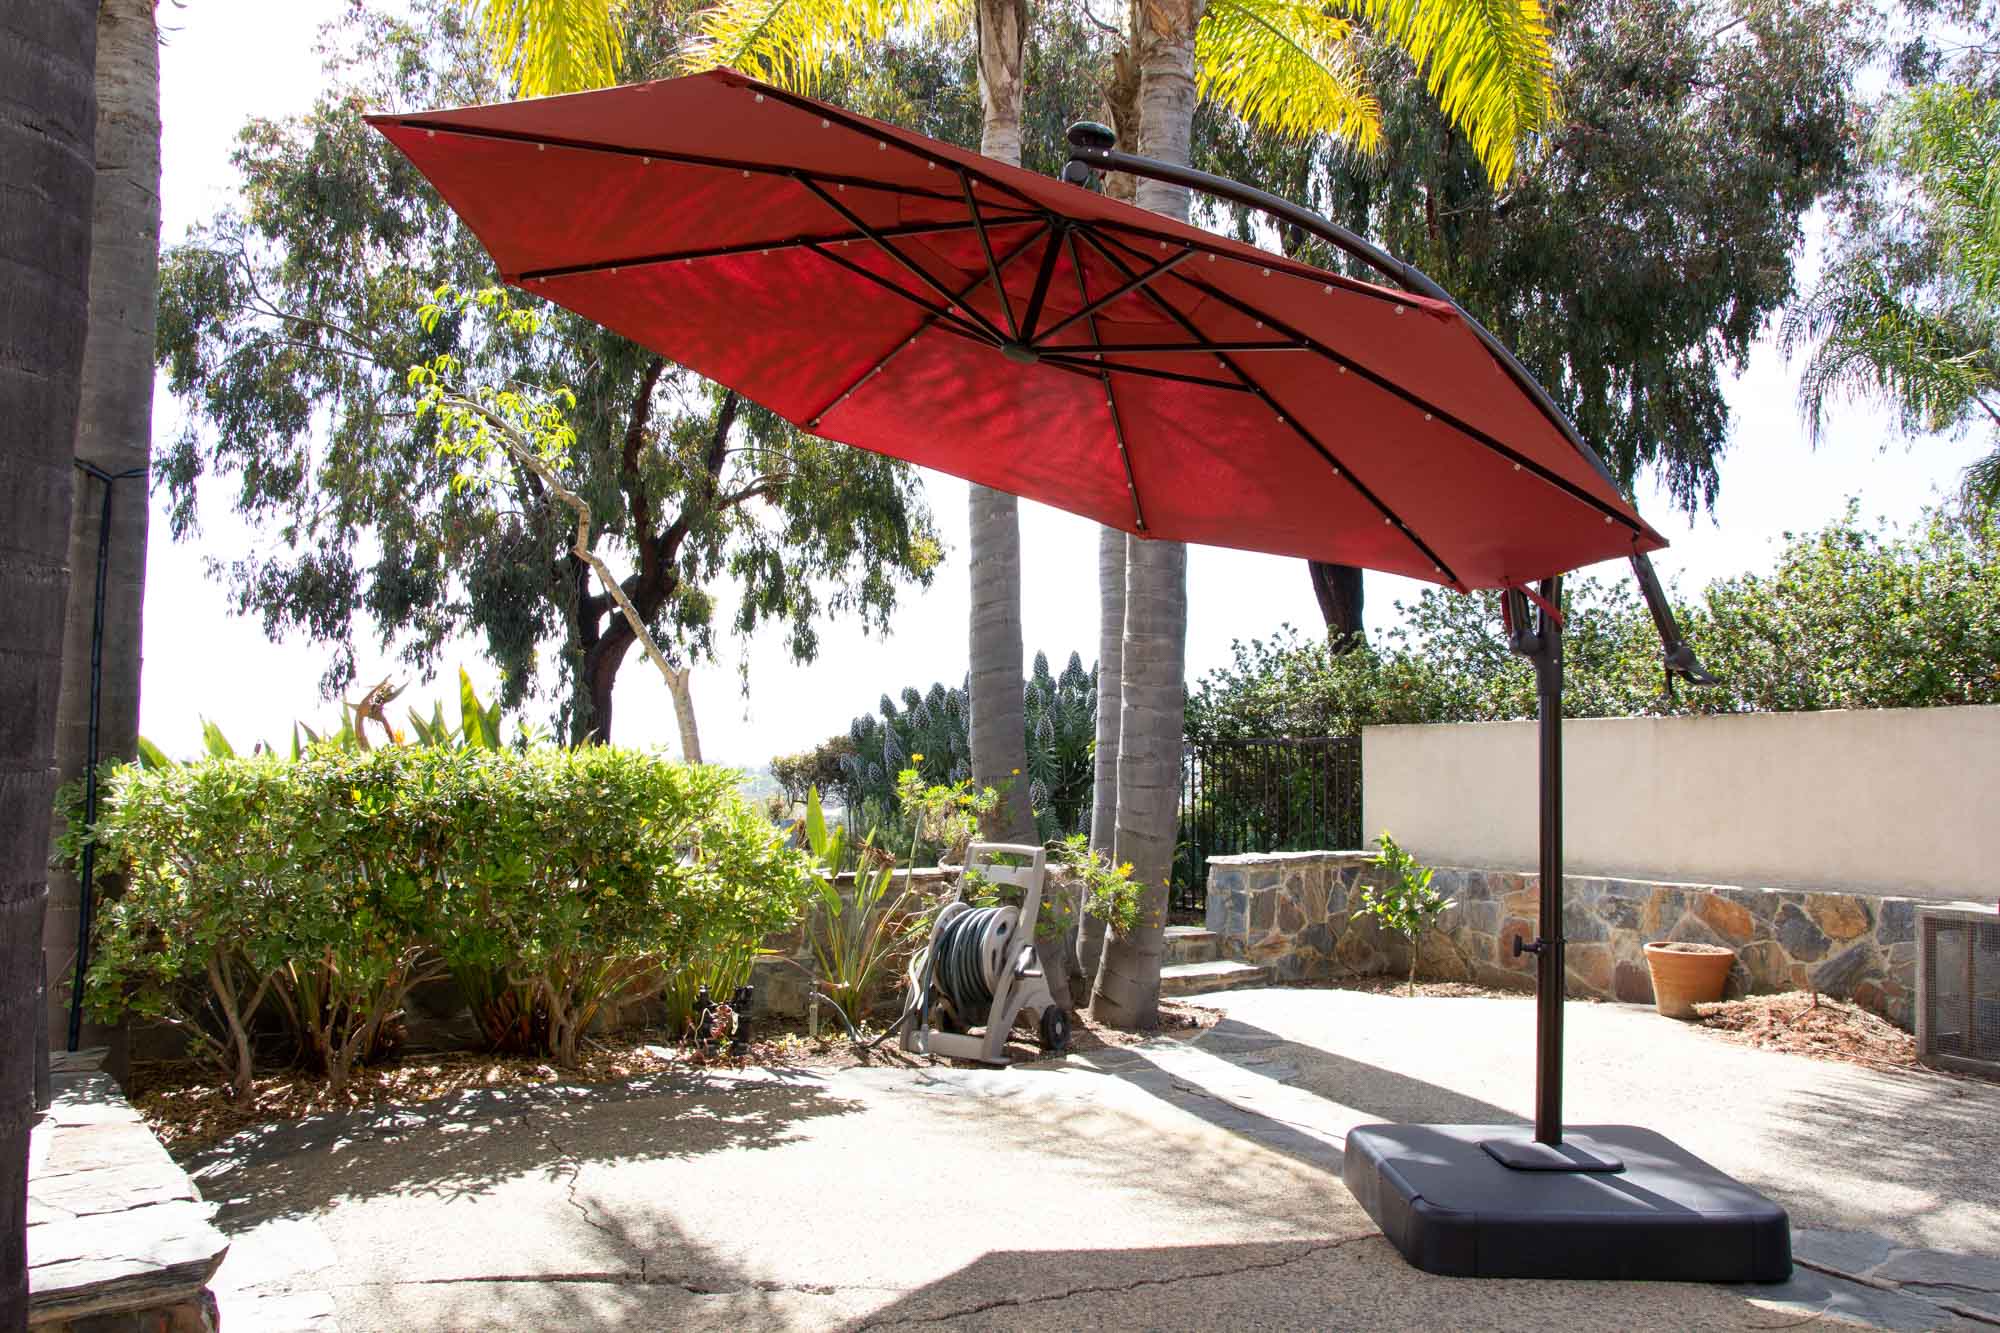 The POOL UMBRELLA CLAMP Secures Pool Umbrellas In High Winds. 